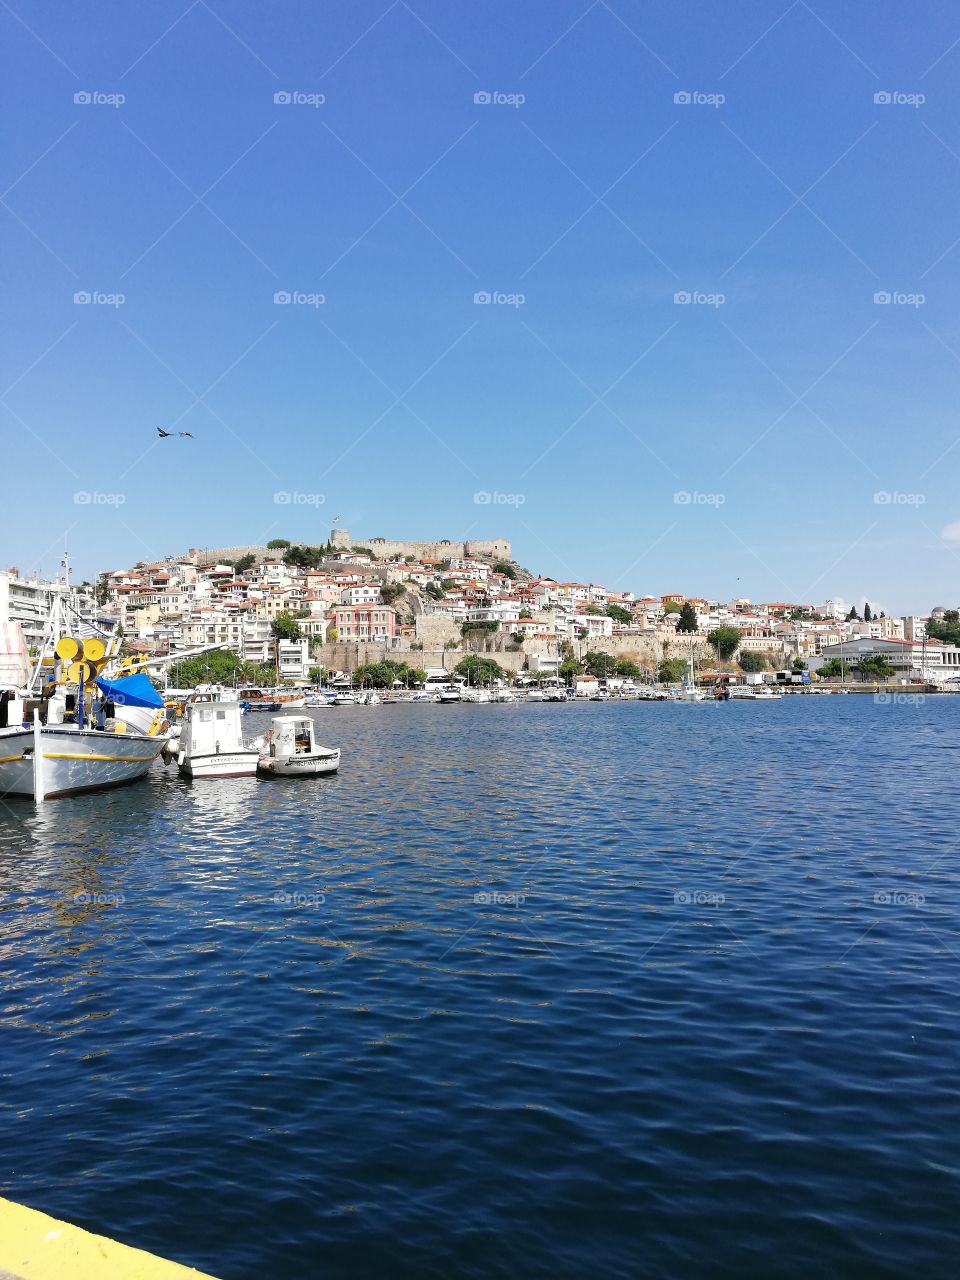 A lovely day in Kavala, Greece.